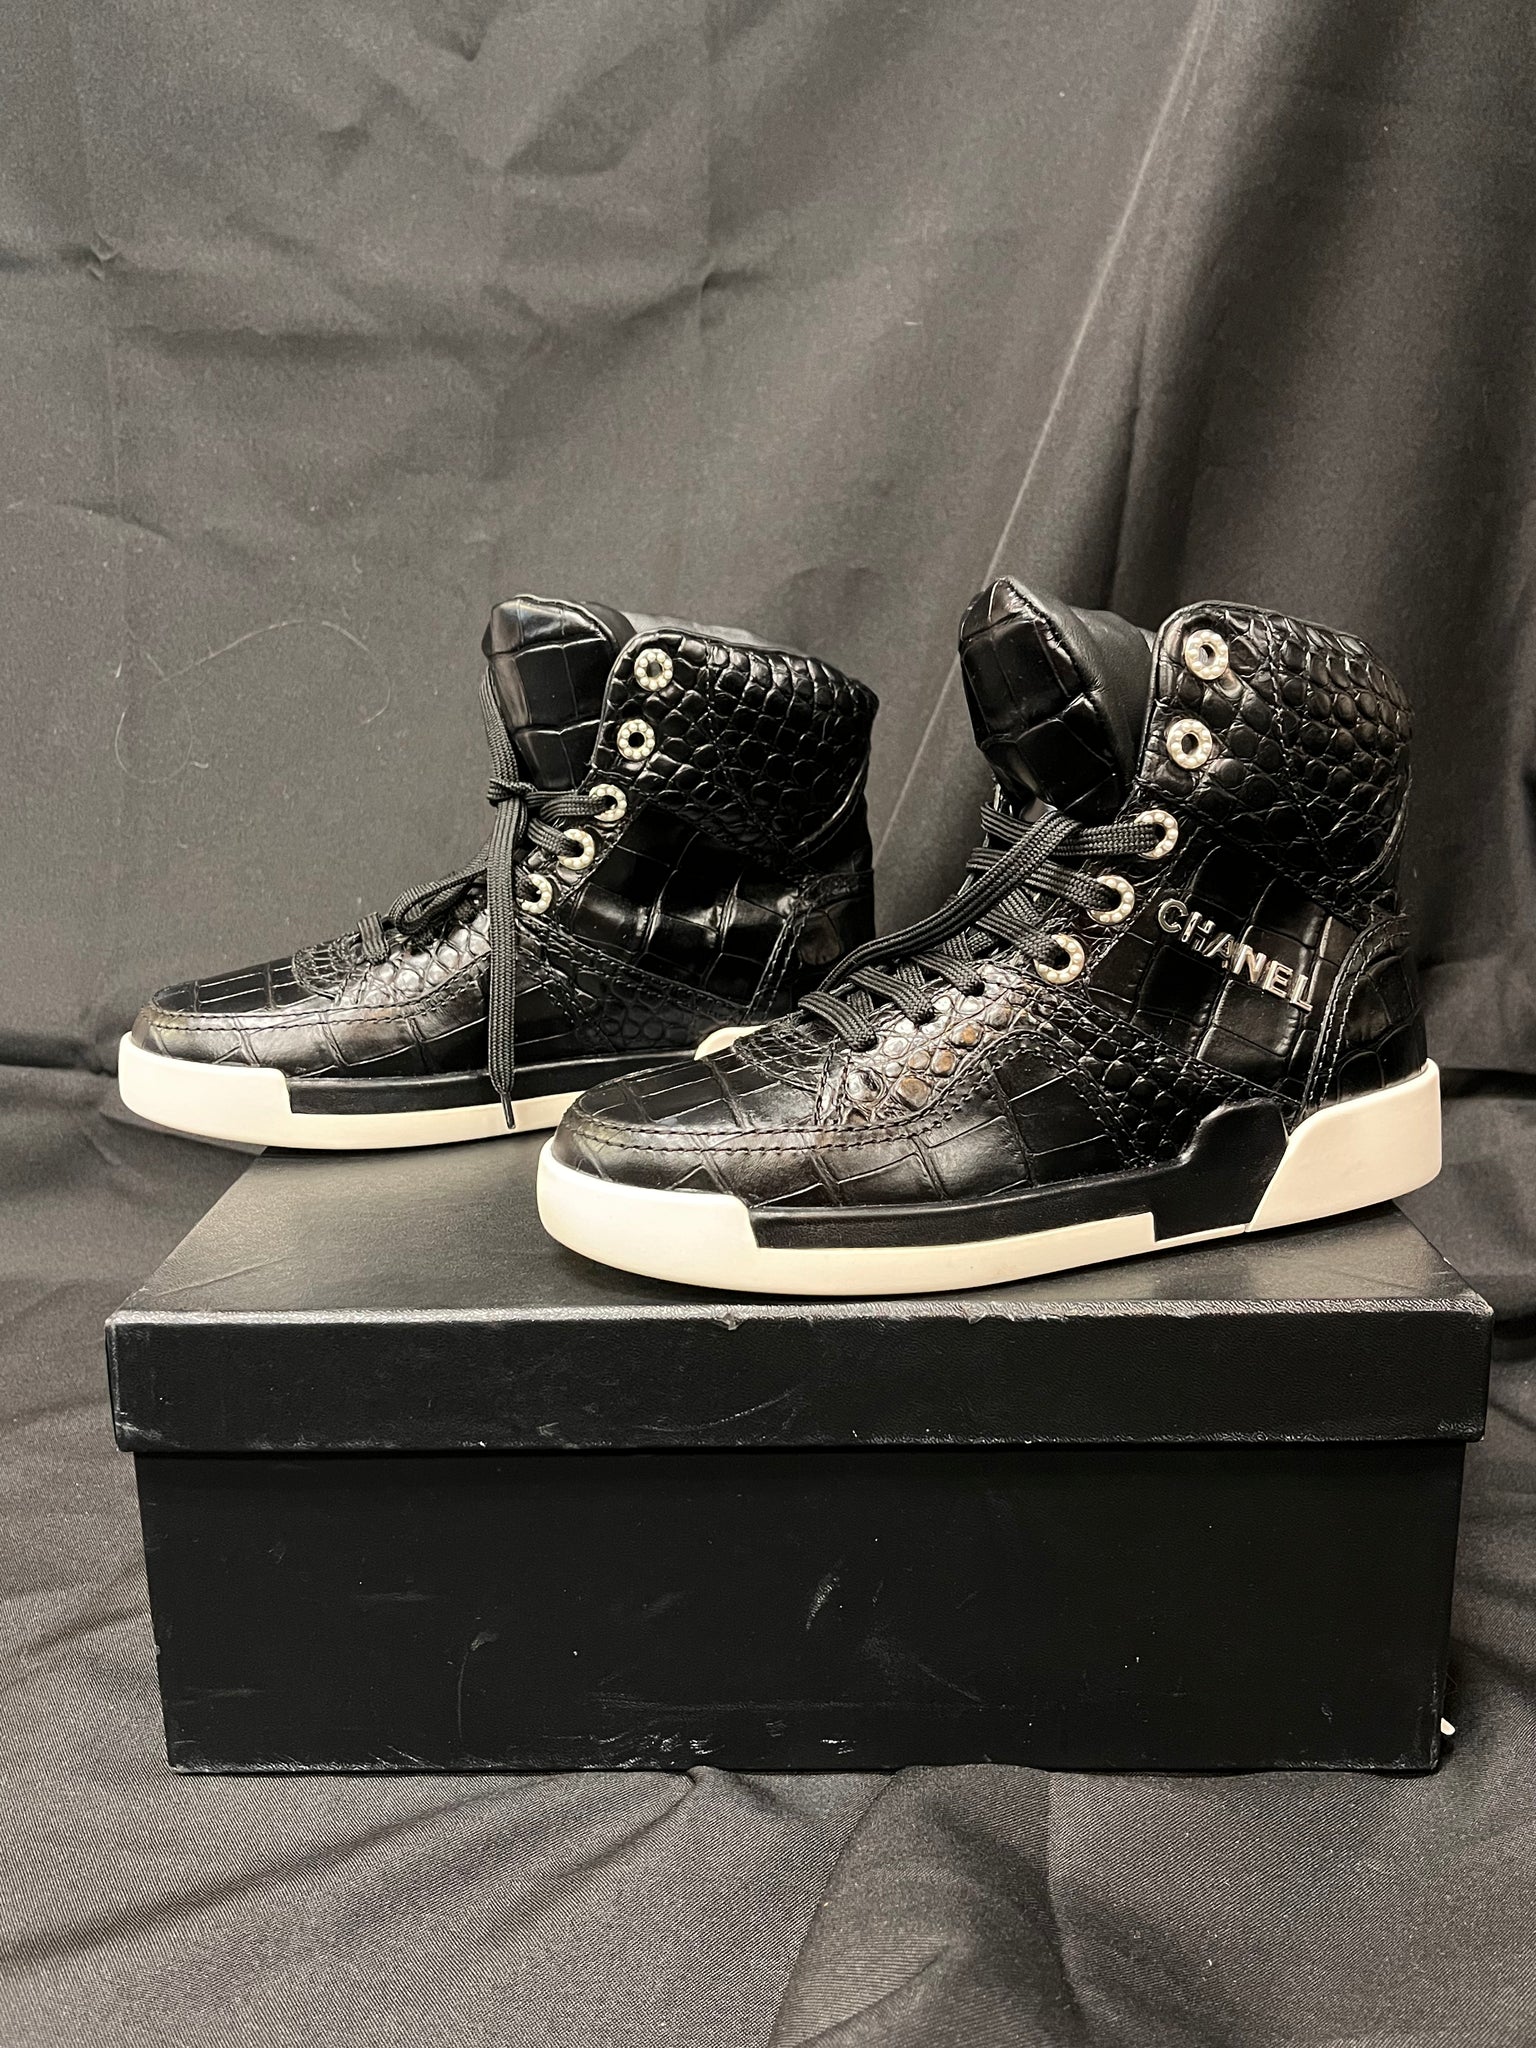 Chanel Crocodile Leather Embossed High-Top Sneakers